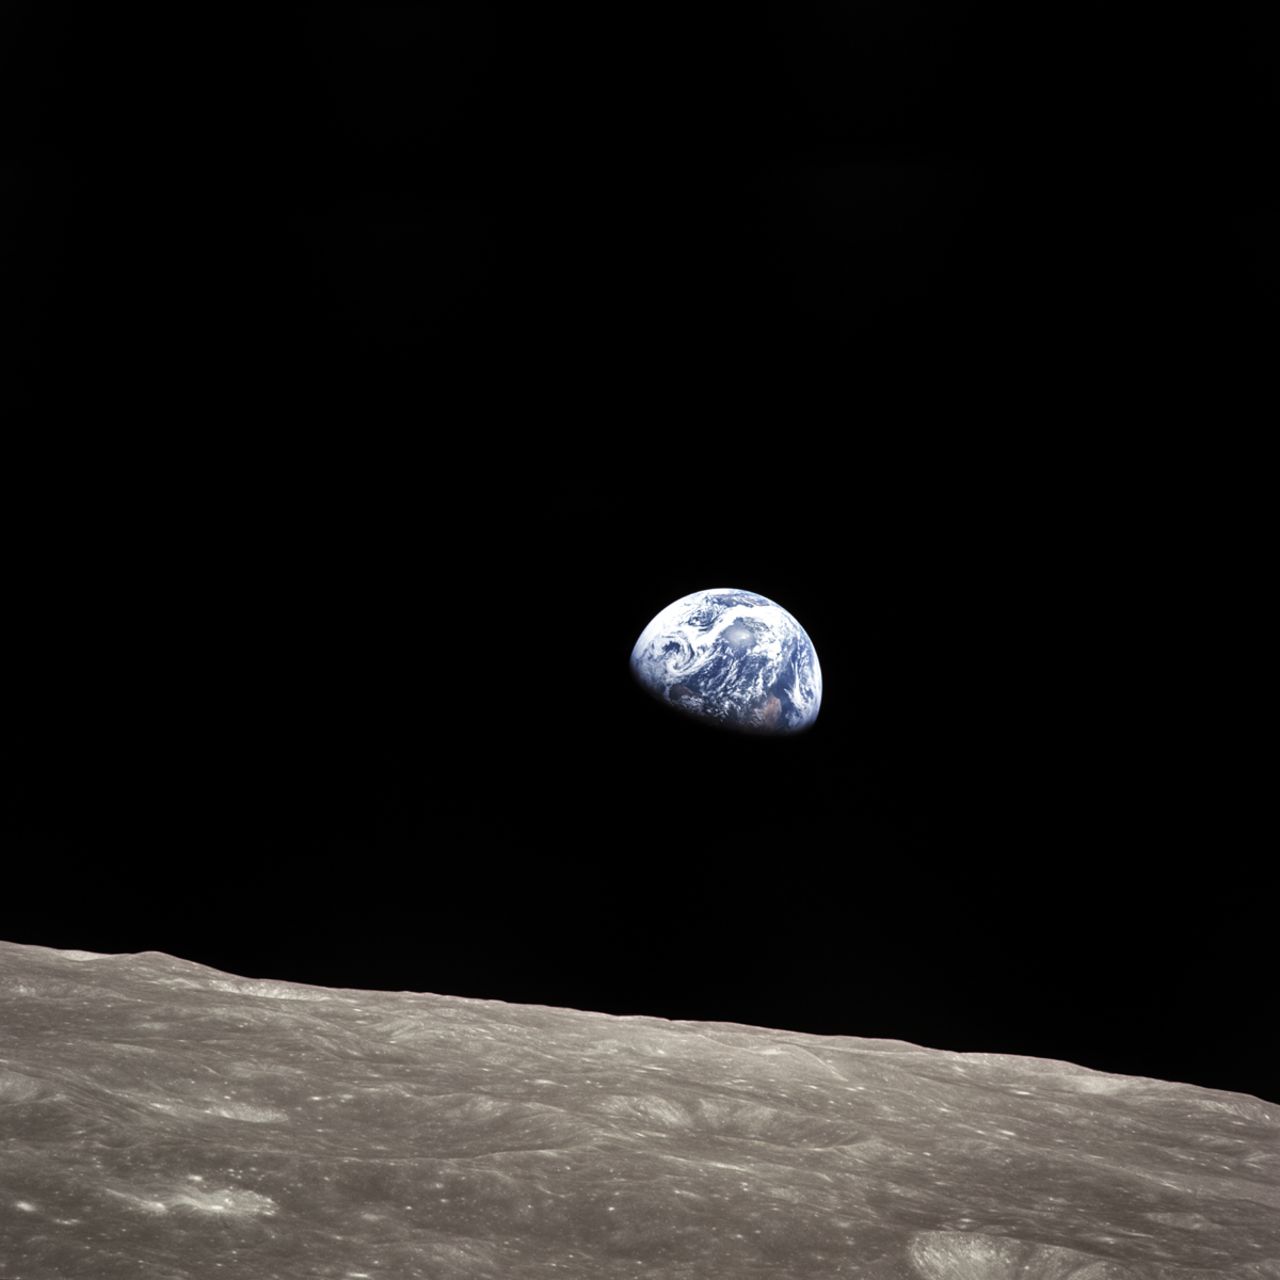 One of the most iconic photographs ever taken, "Earthrise" was captured from lunar orbit by Apollo 8 astronaut William Anders on December 24, 1968. The mission marked the first manned spacecraft to orbit the moon. 